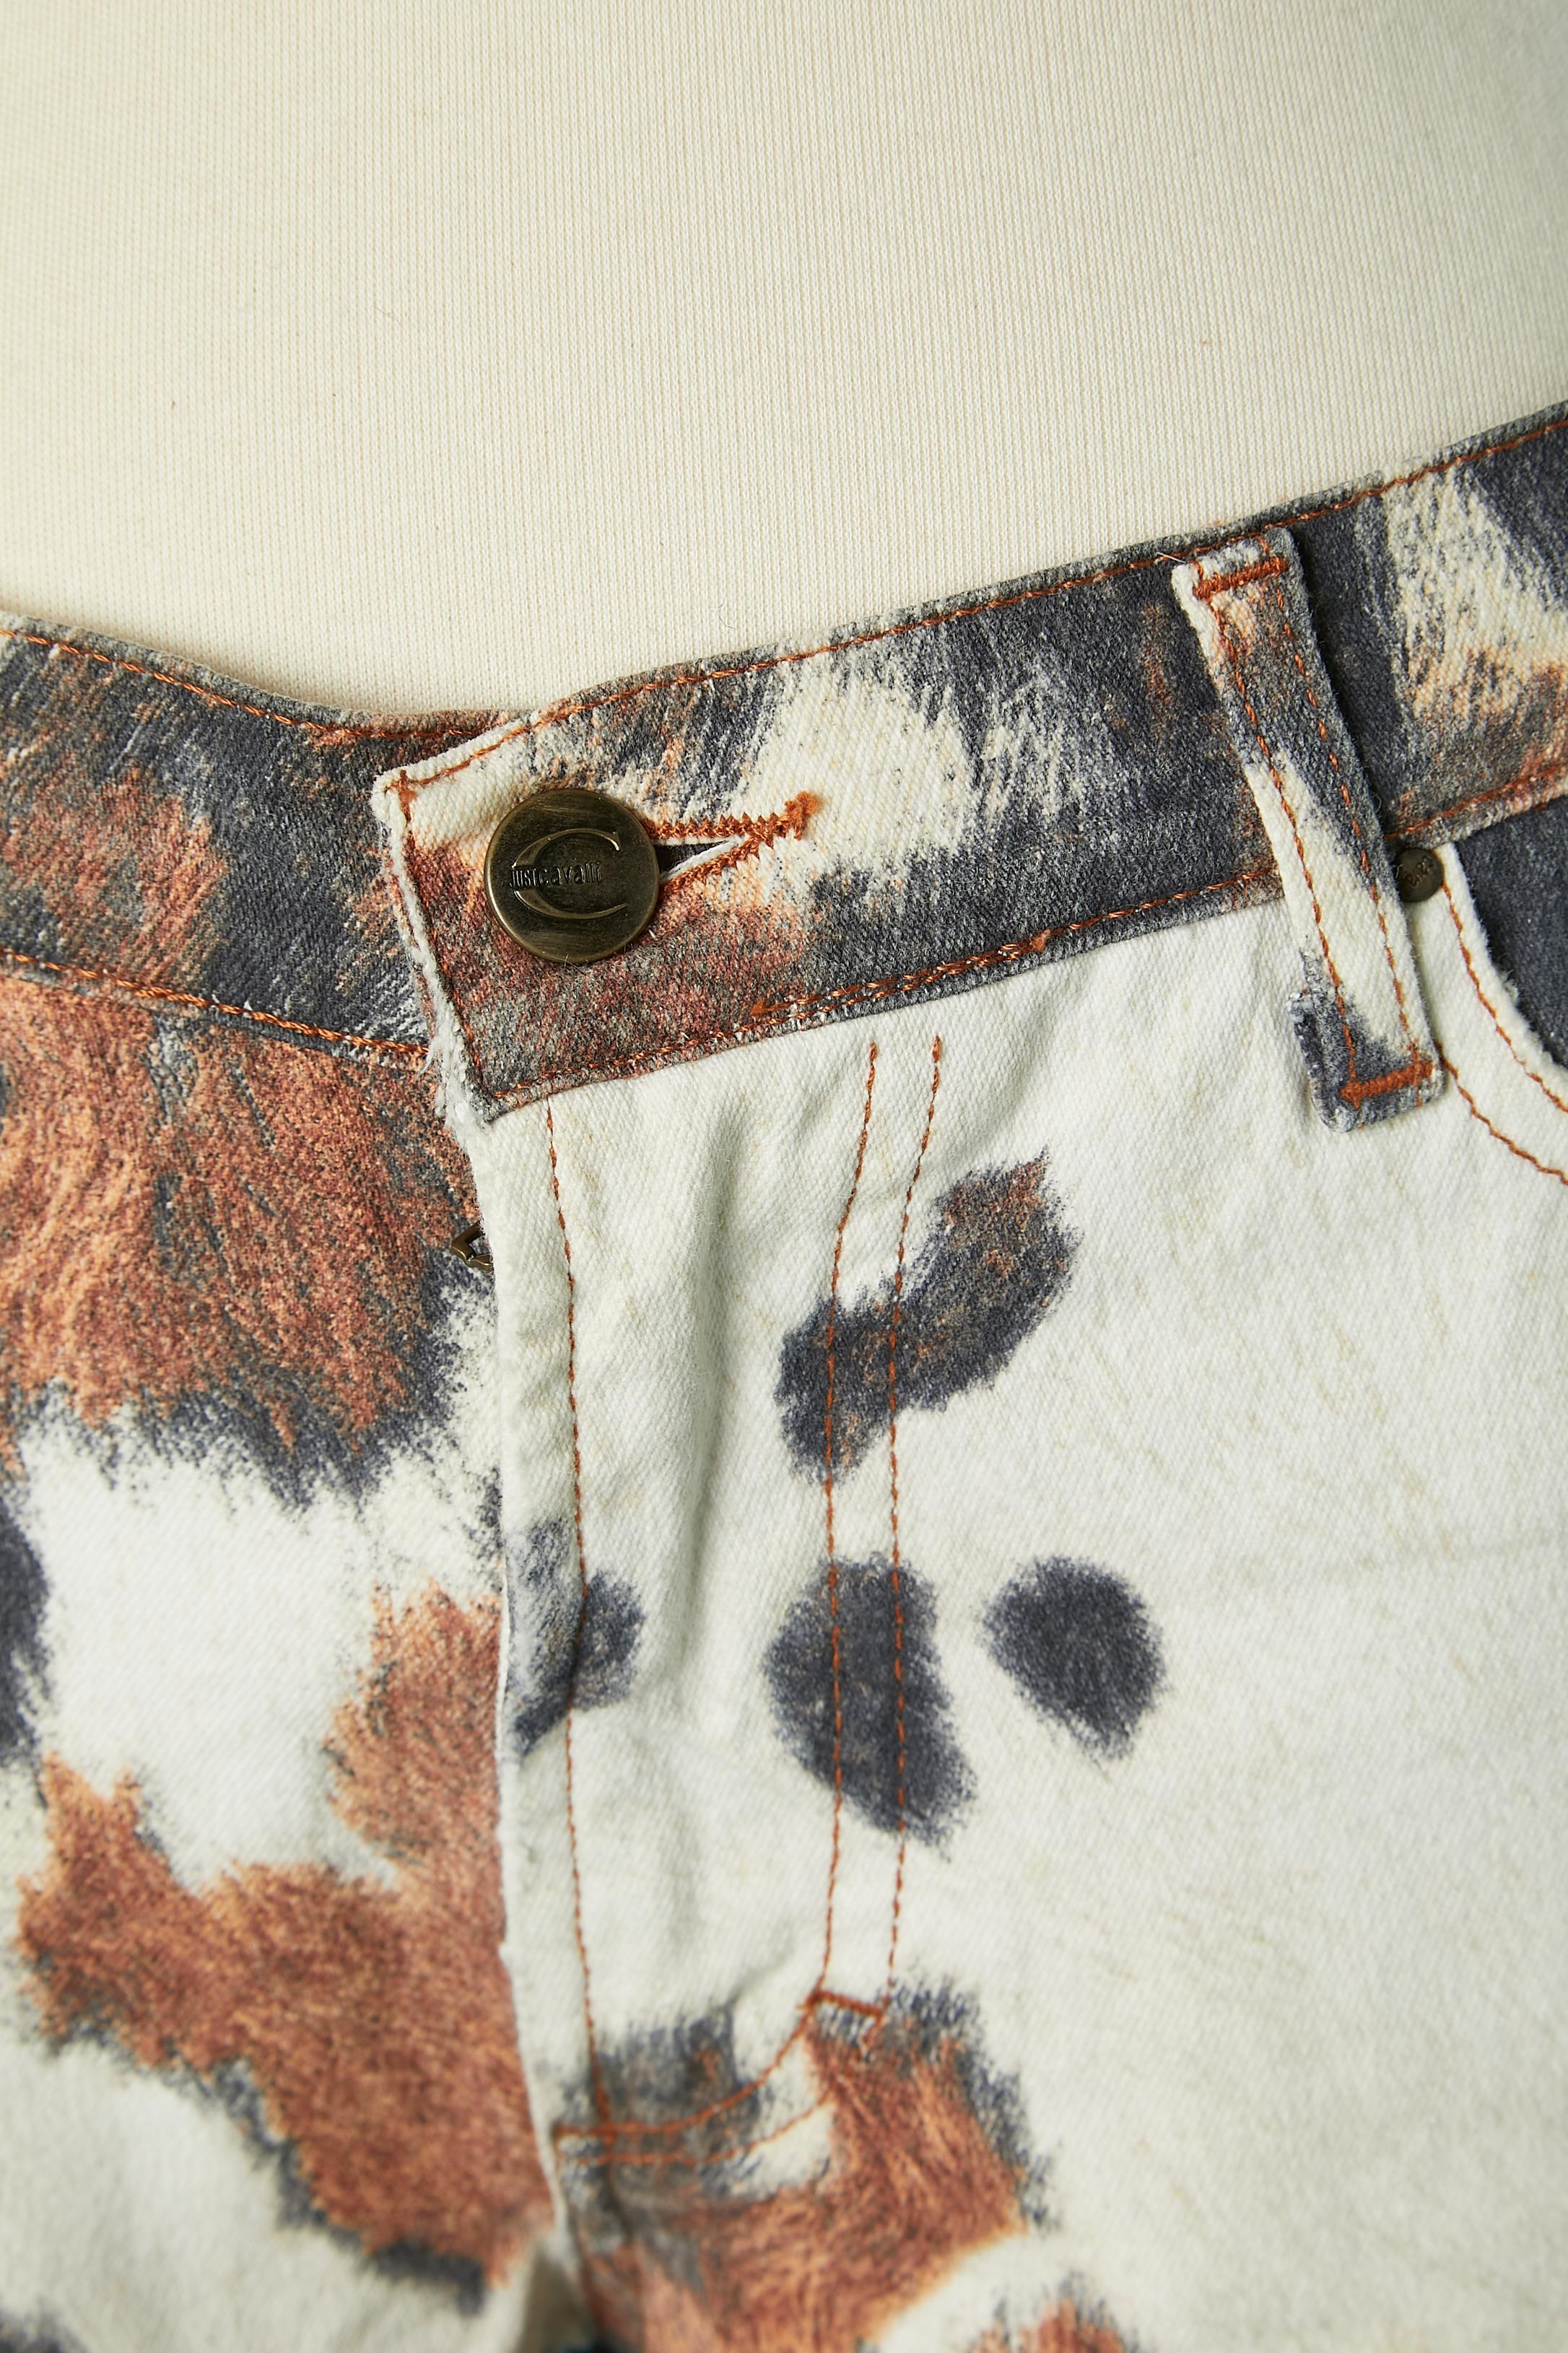 Animal pattern printed jeans. Main fabric: Cotton. Pocket's lining: polyester and cotton. Belt-loop, branded studs, branded button closure in the top middle front + zip.
SIZE 42 (It) 38 (Fr) 8 (US ) M

